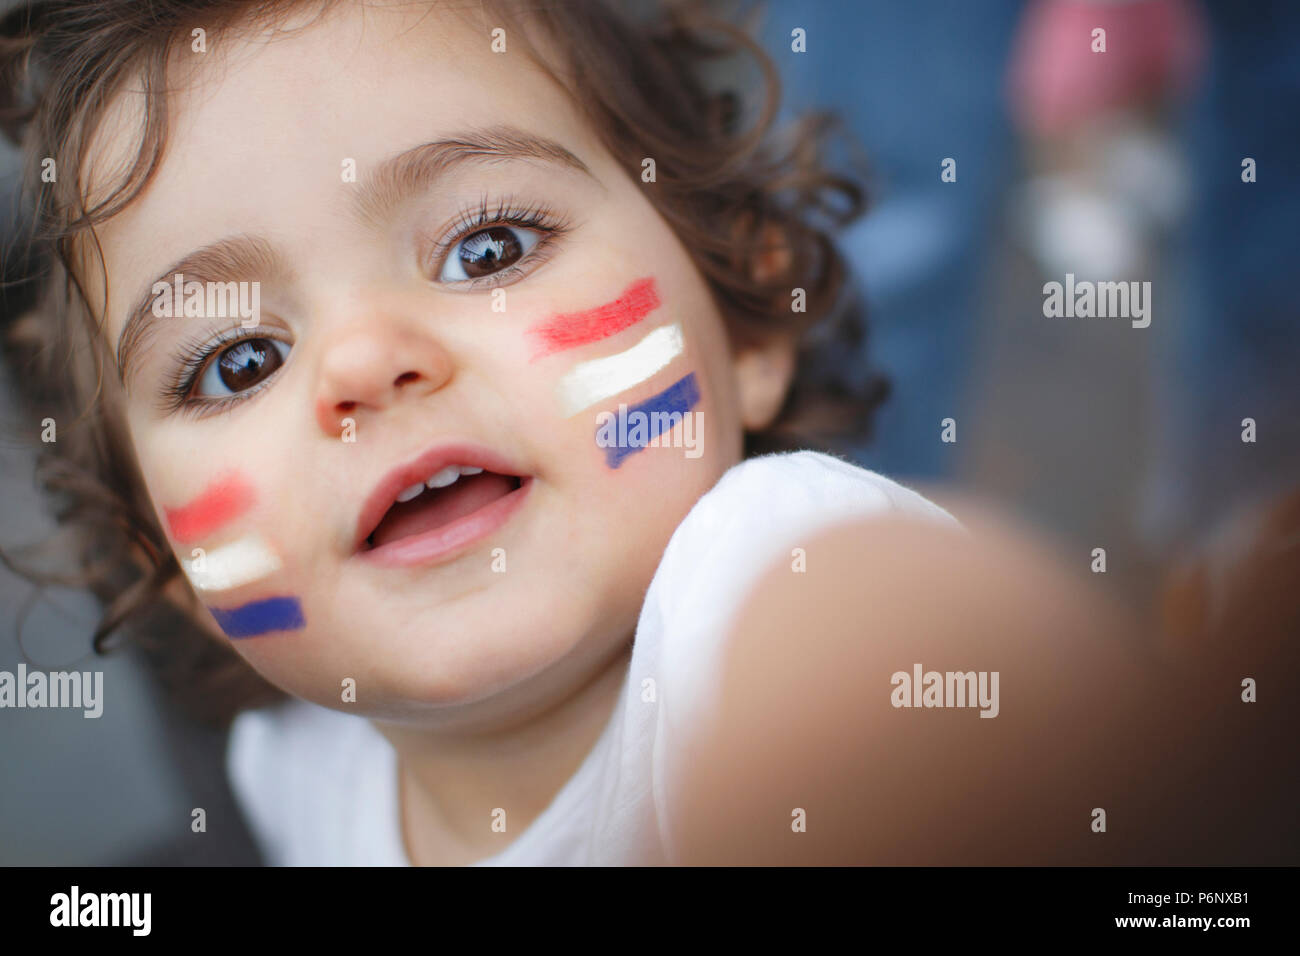 Kid fan with red, white and blue flag painted on face Stock Photo